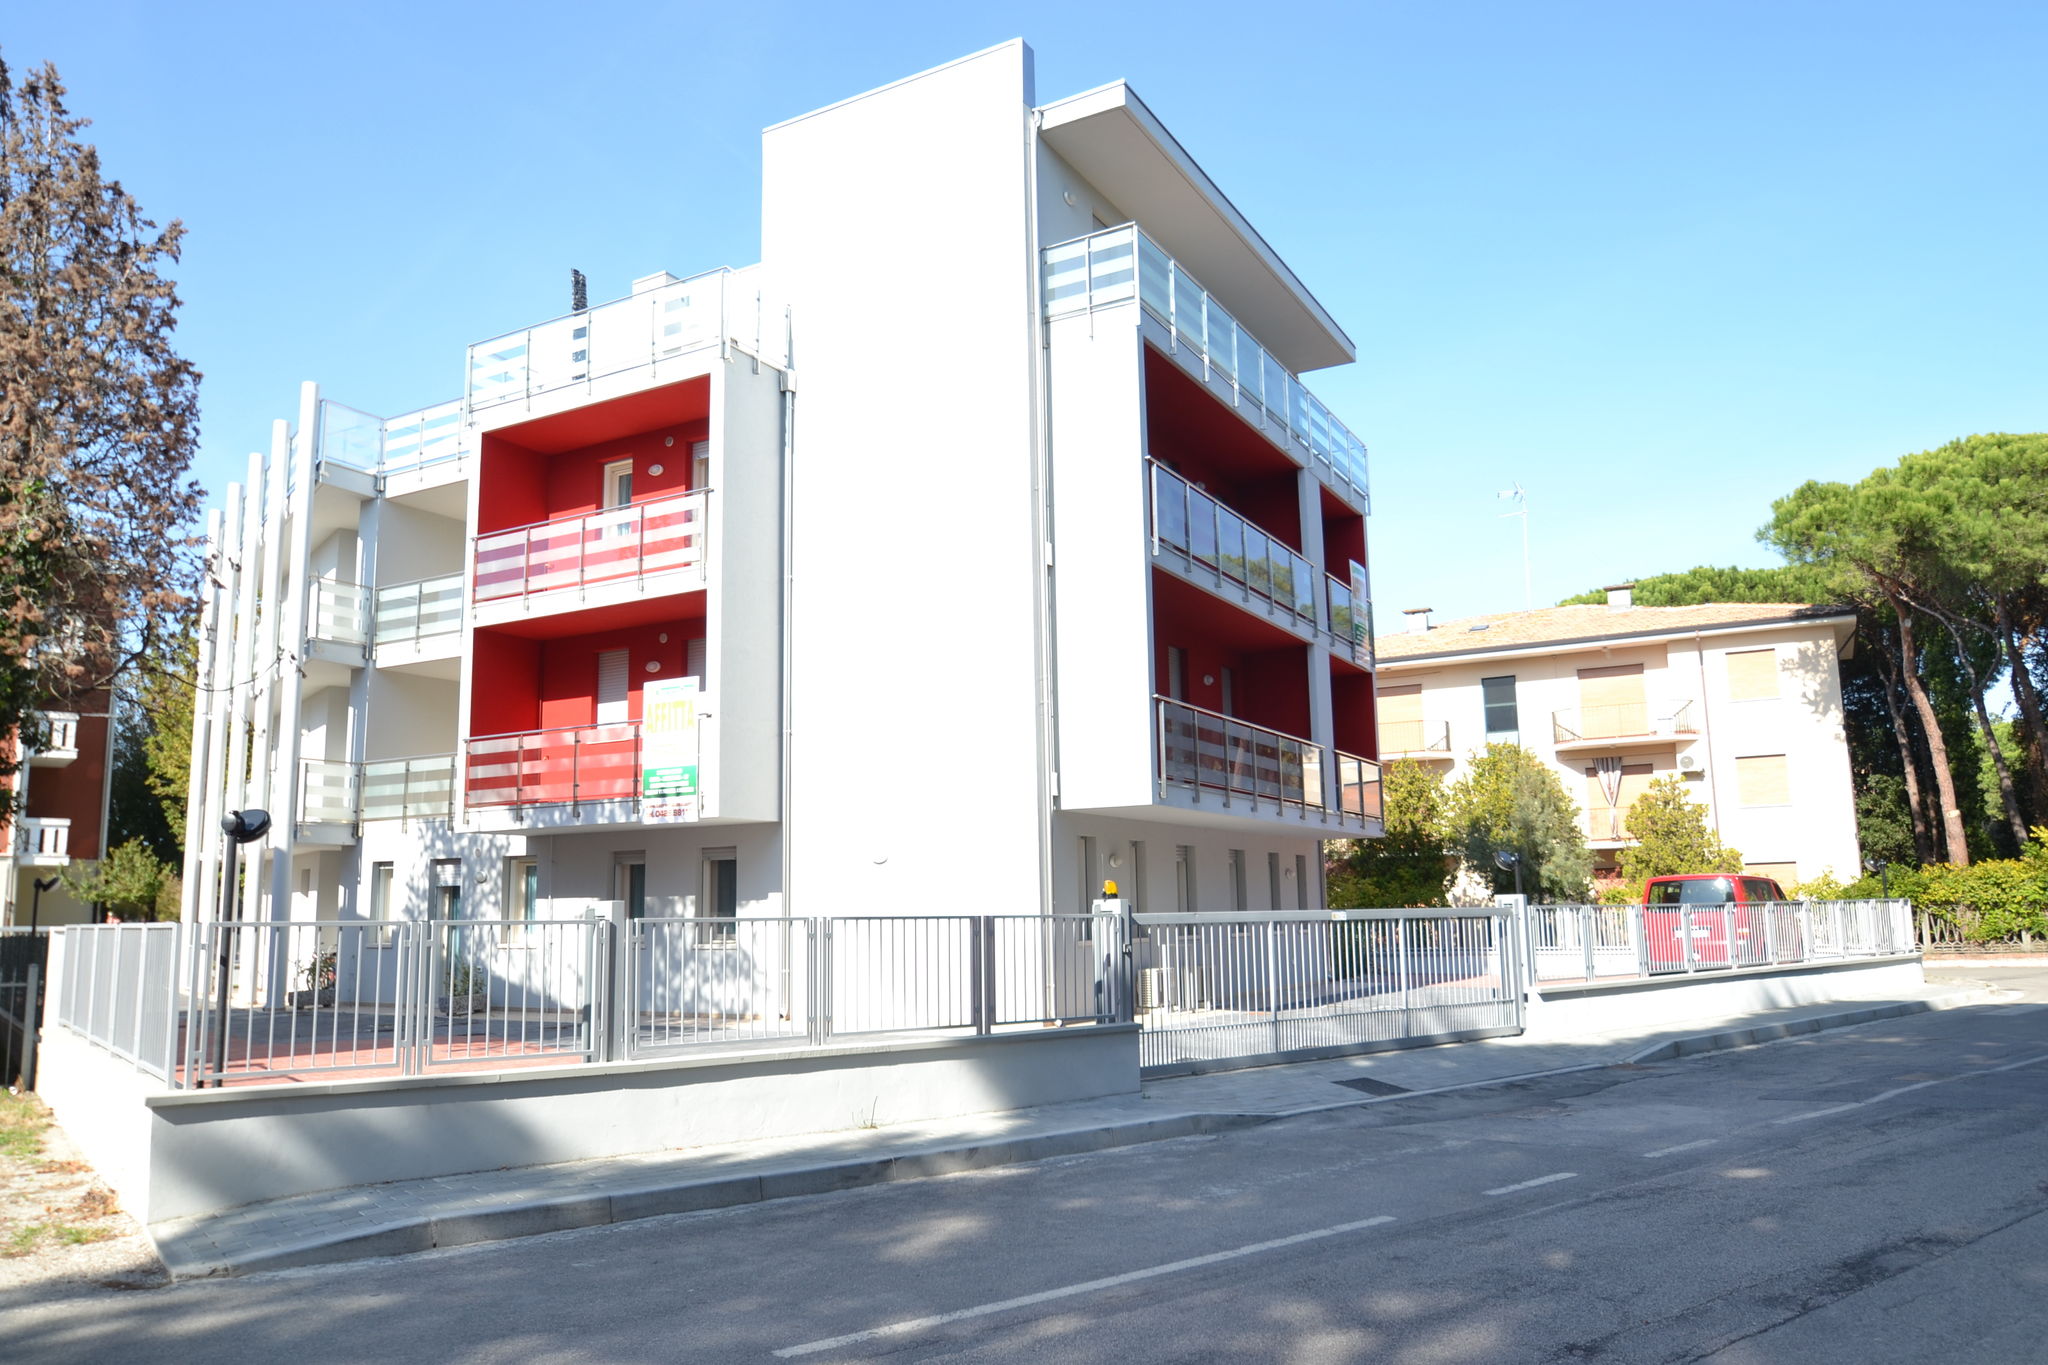 New modern apartments in Rosolina Mare city centre, equipped with all comforts